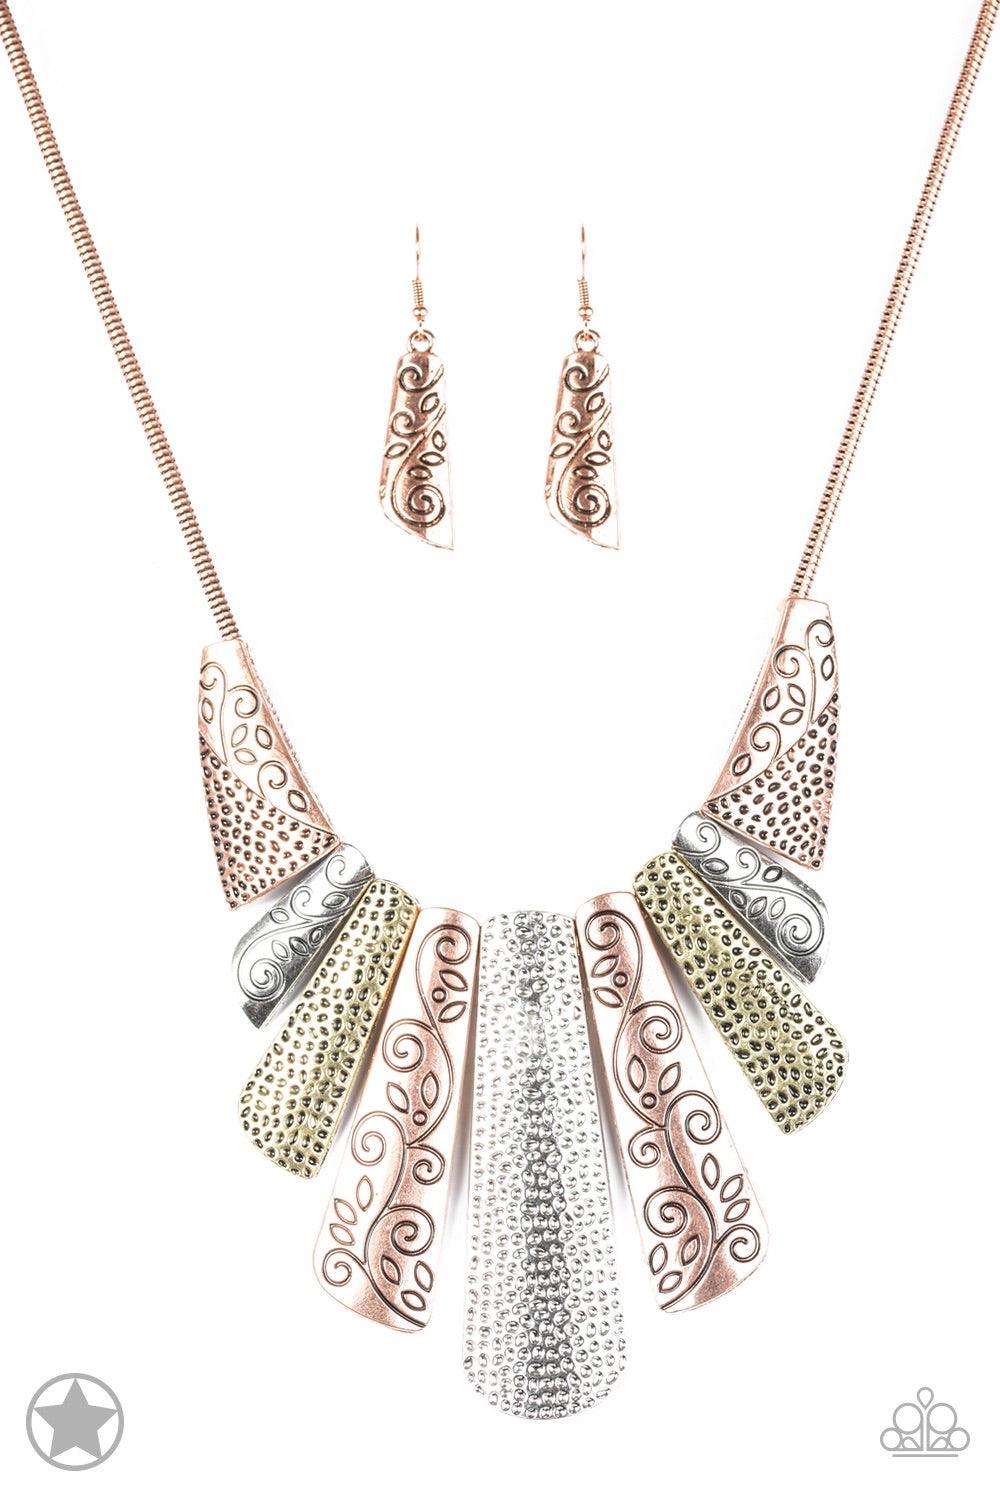 Paparazzi Accessories Untamed - Multi Copper, silver and brass plates featuring various hammered and filigreed textures fan out across the chest along a thick copper snake chain. The gorgeous tribal design falls gracefully below the collar into a dramatic